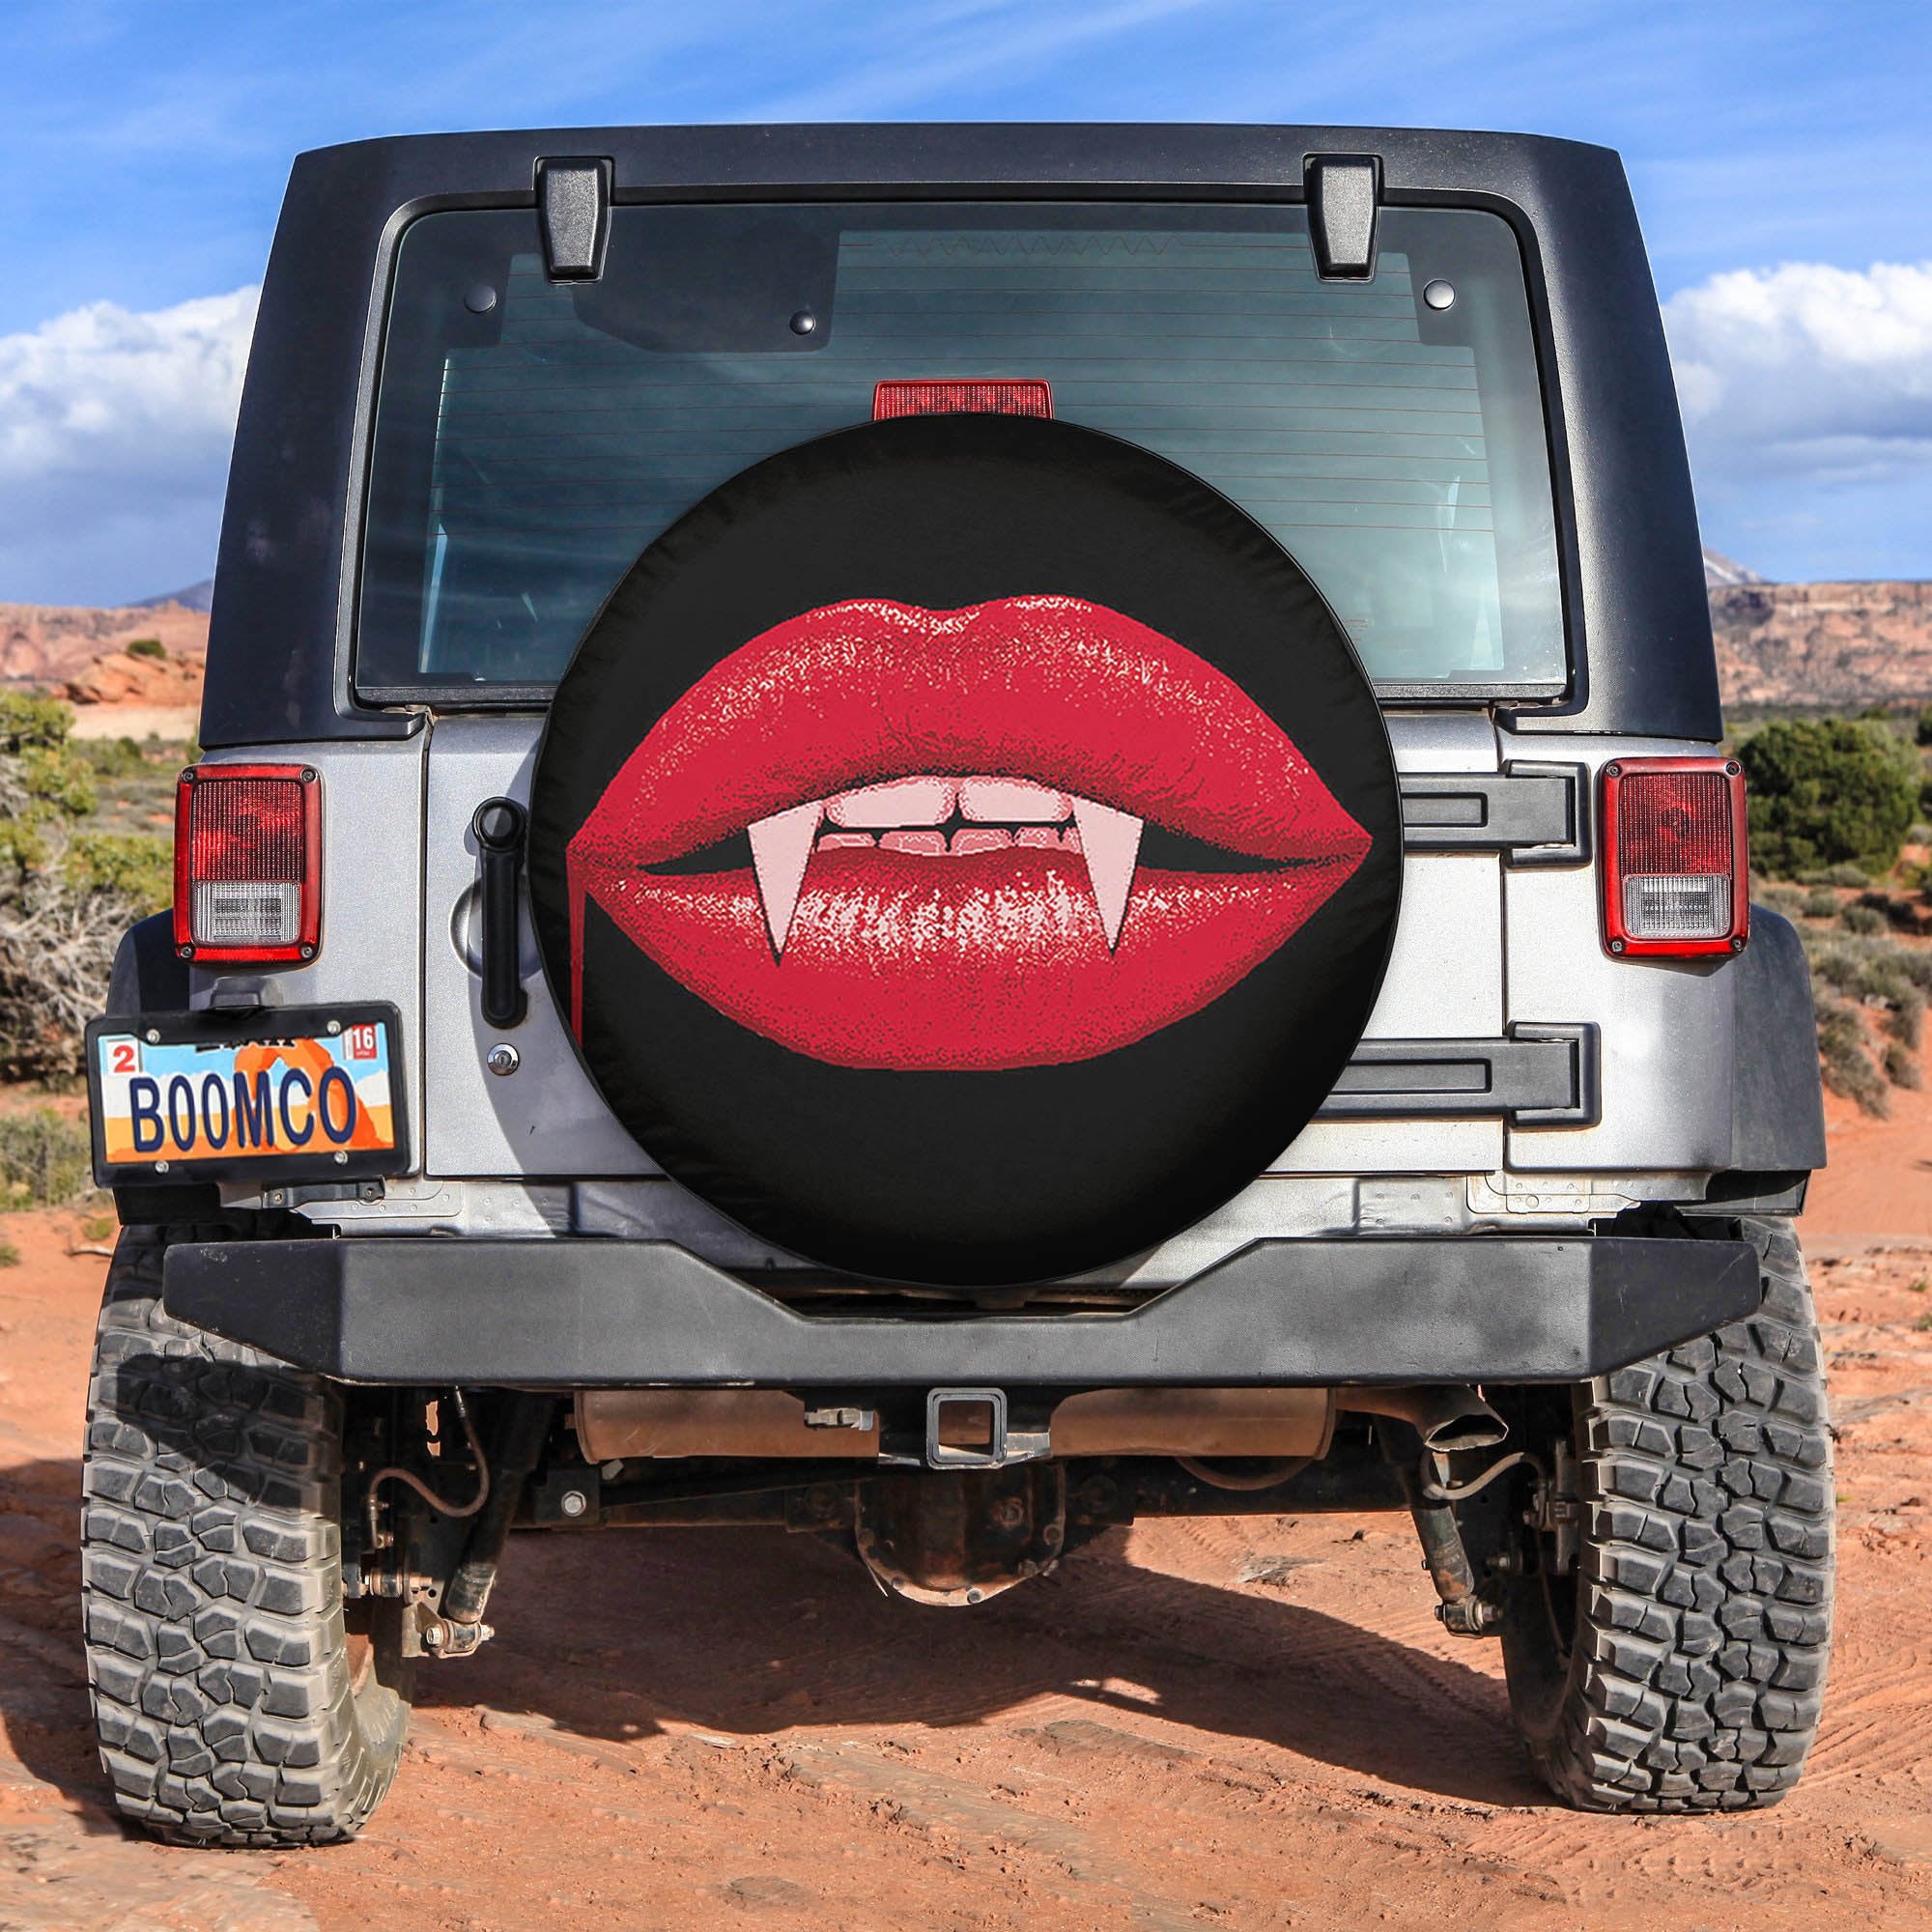 Vampire Mouth Horror Spare Tire Covers Gift For Campers